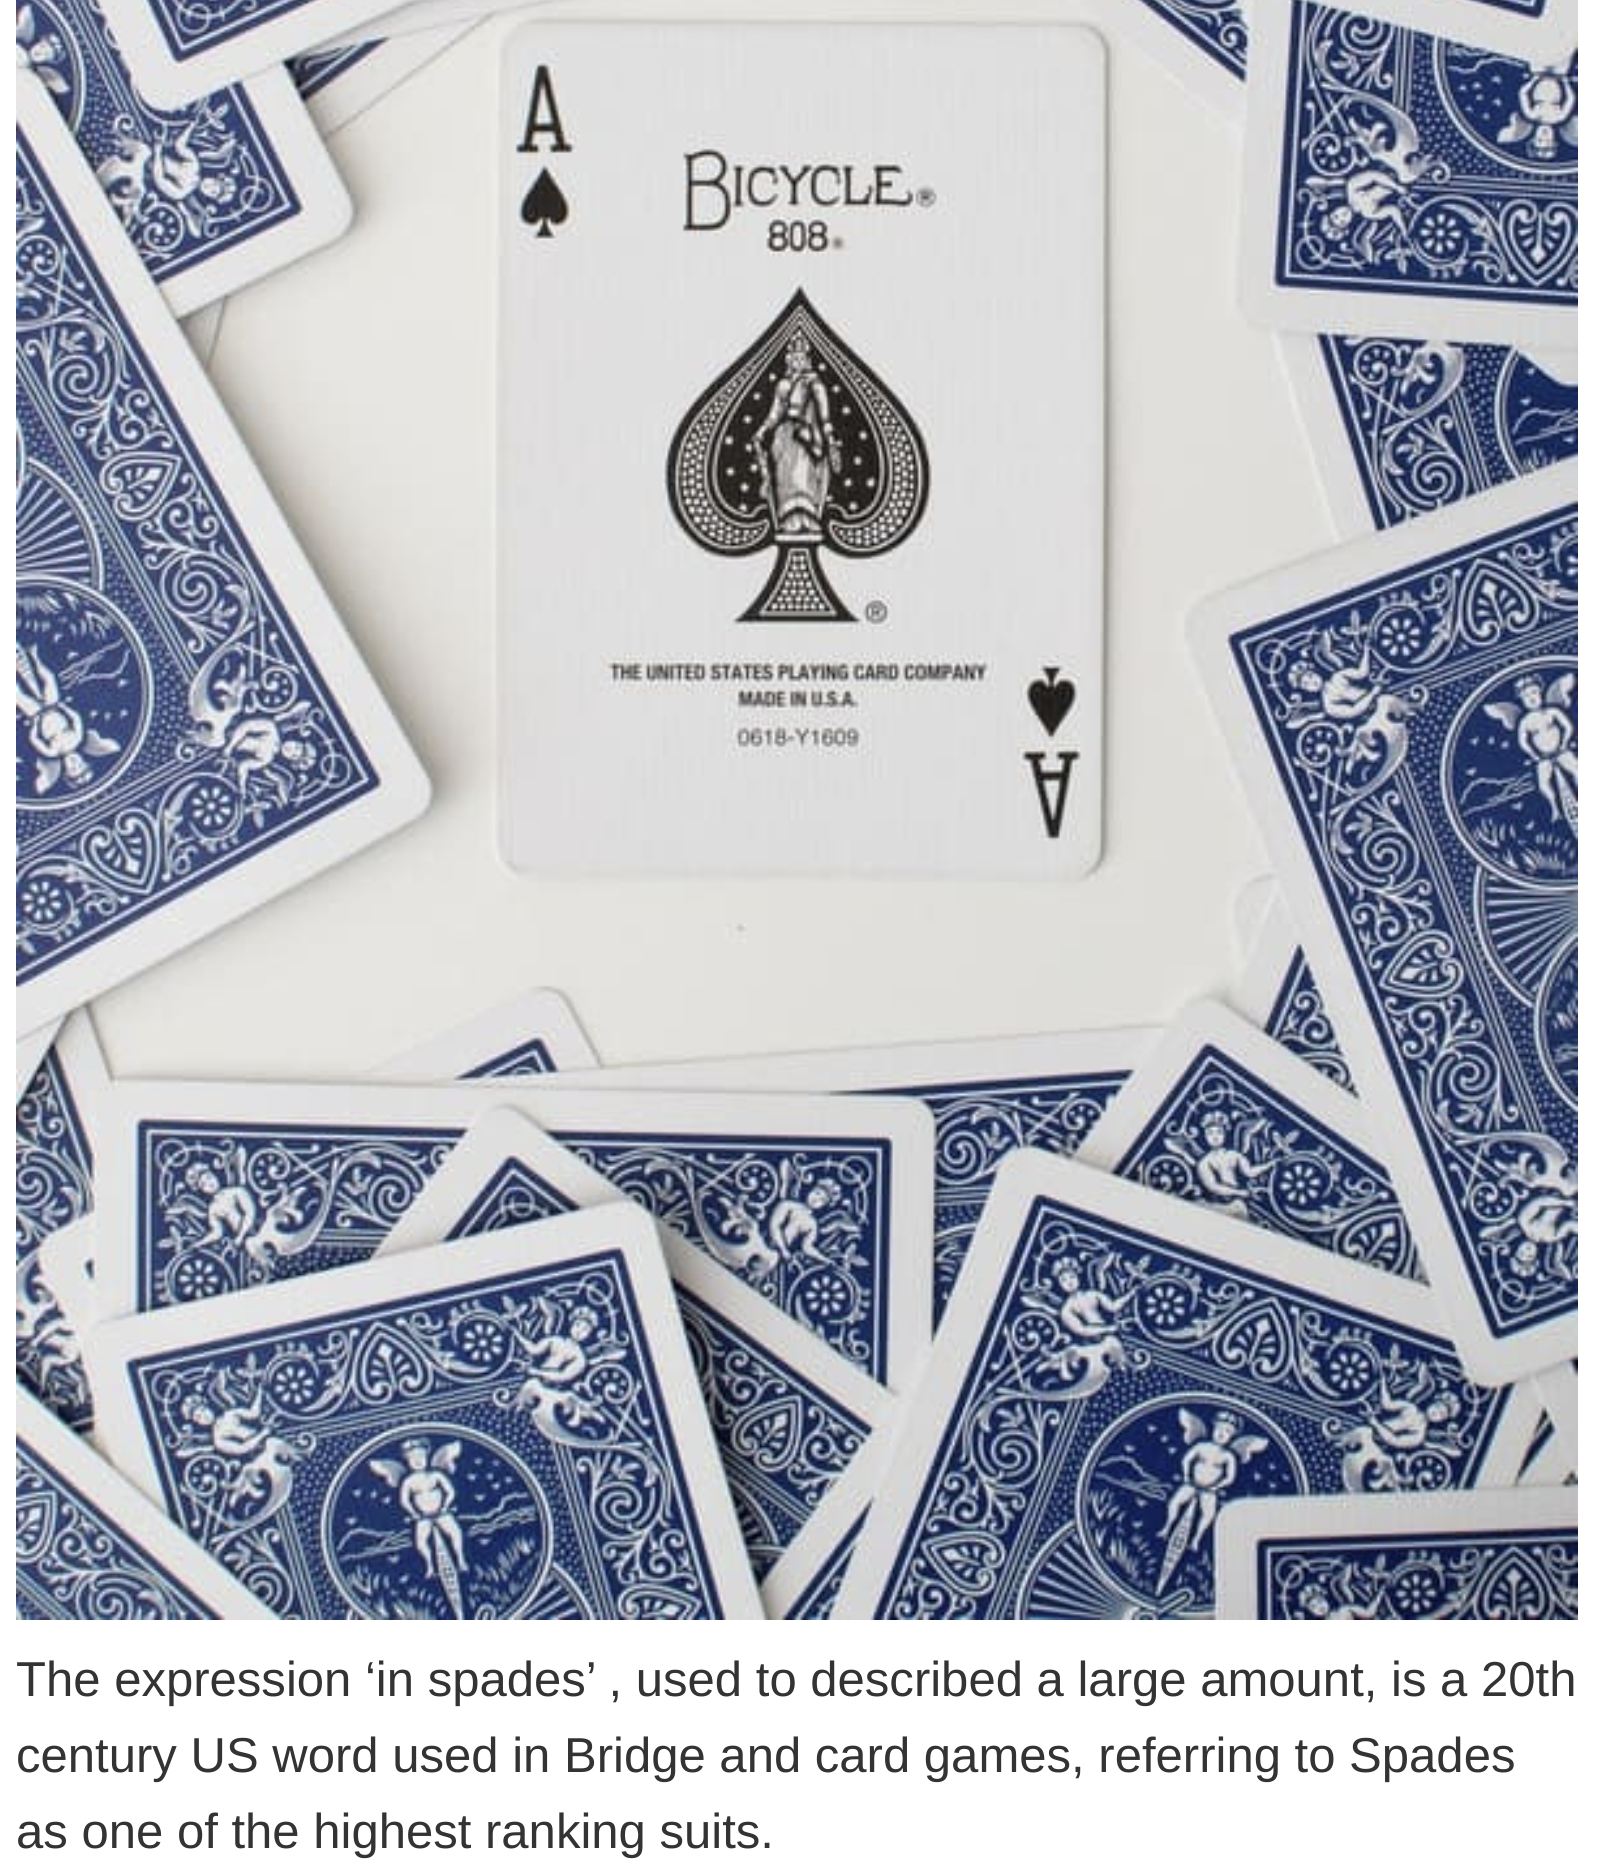 etymology english language - The expression in spades', used to described a large amount, is a 20th century Us word used in Bridge and card games, referring to Spades as one of the highest ranking suits.